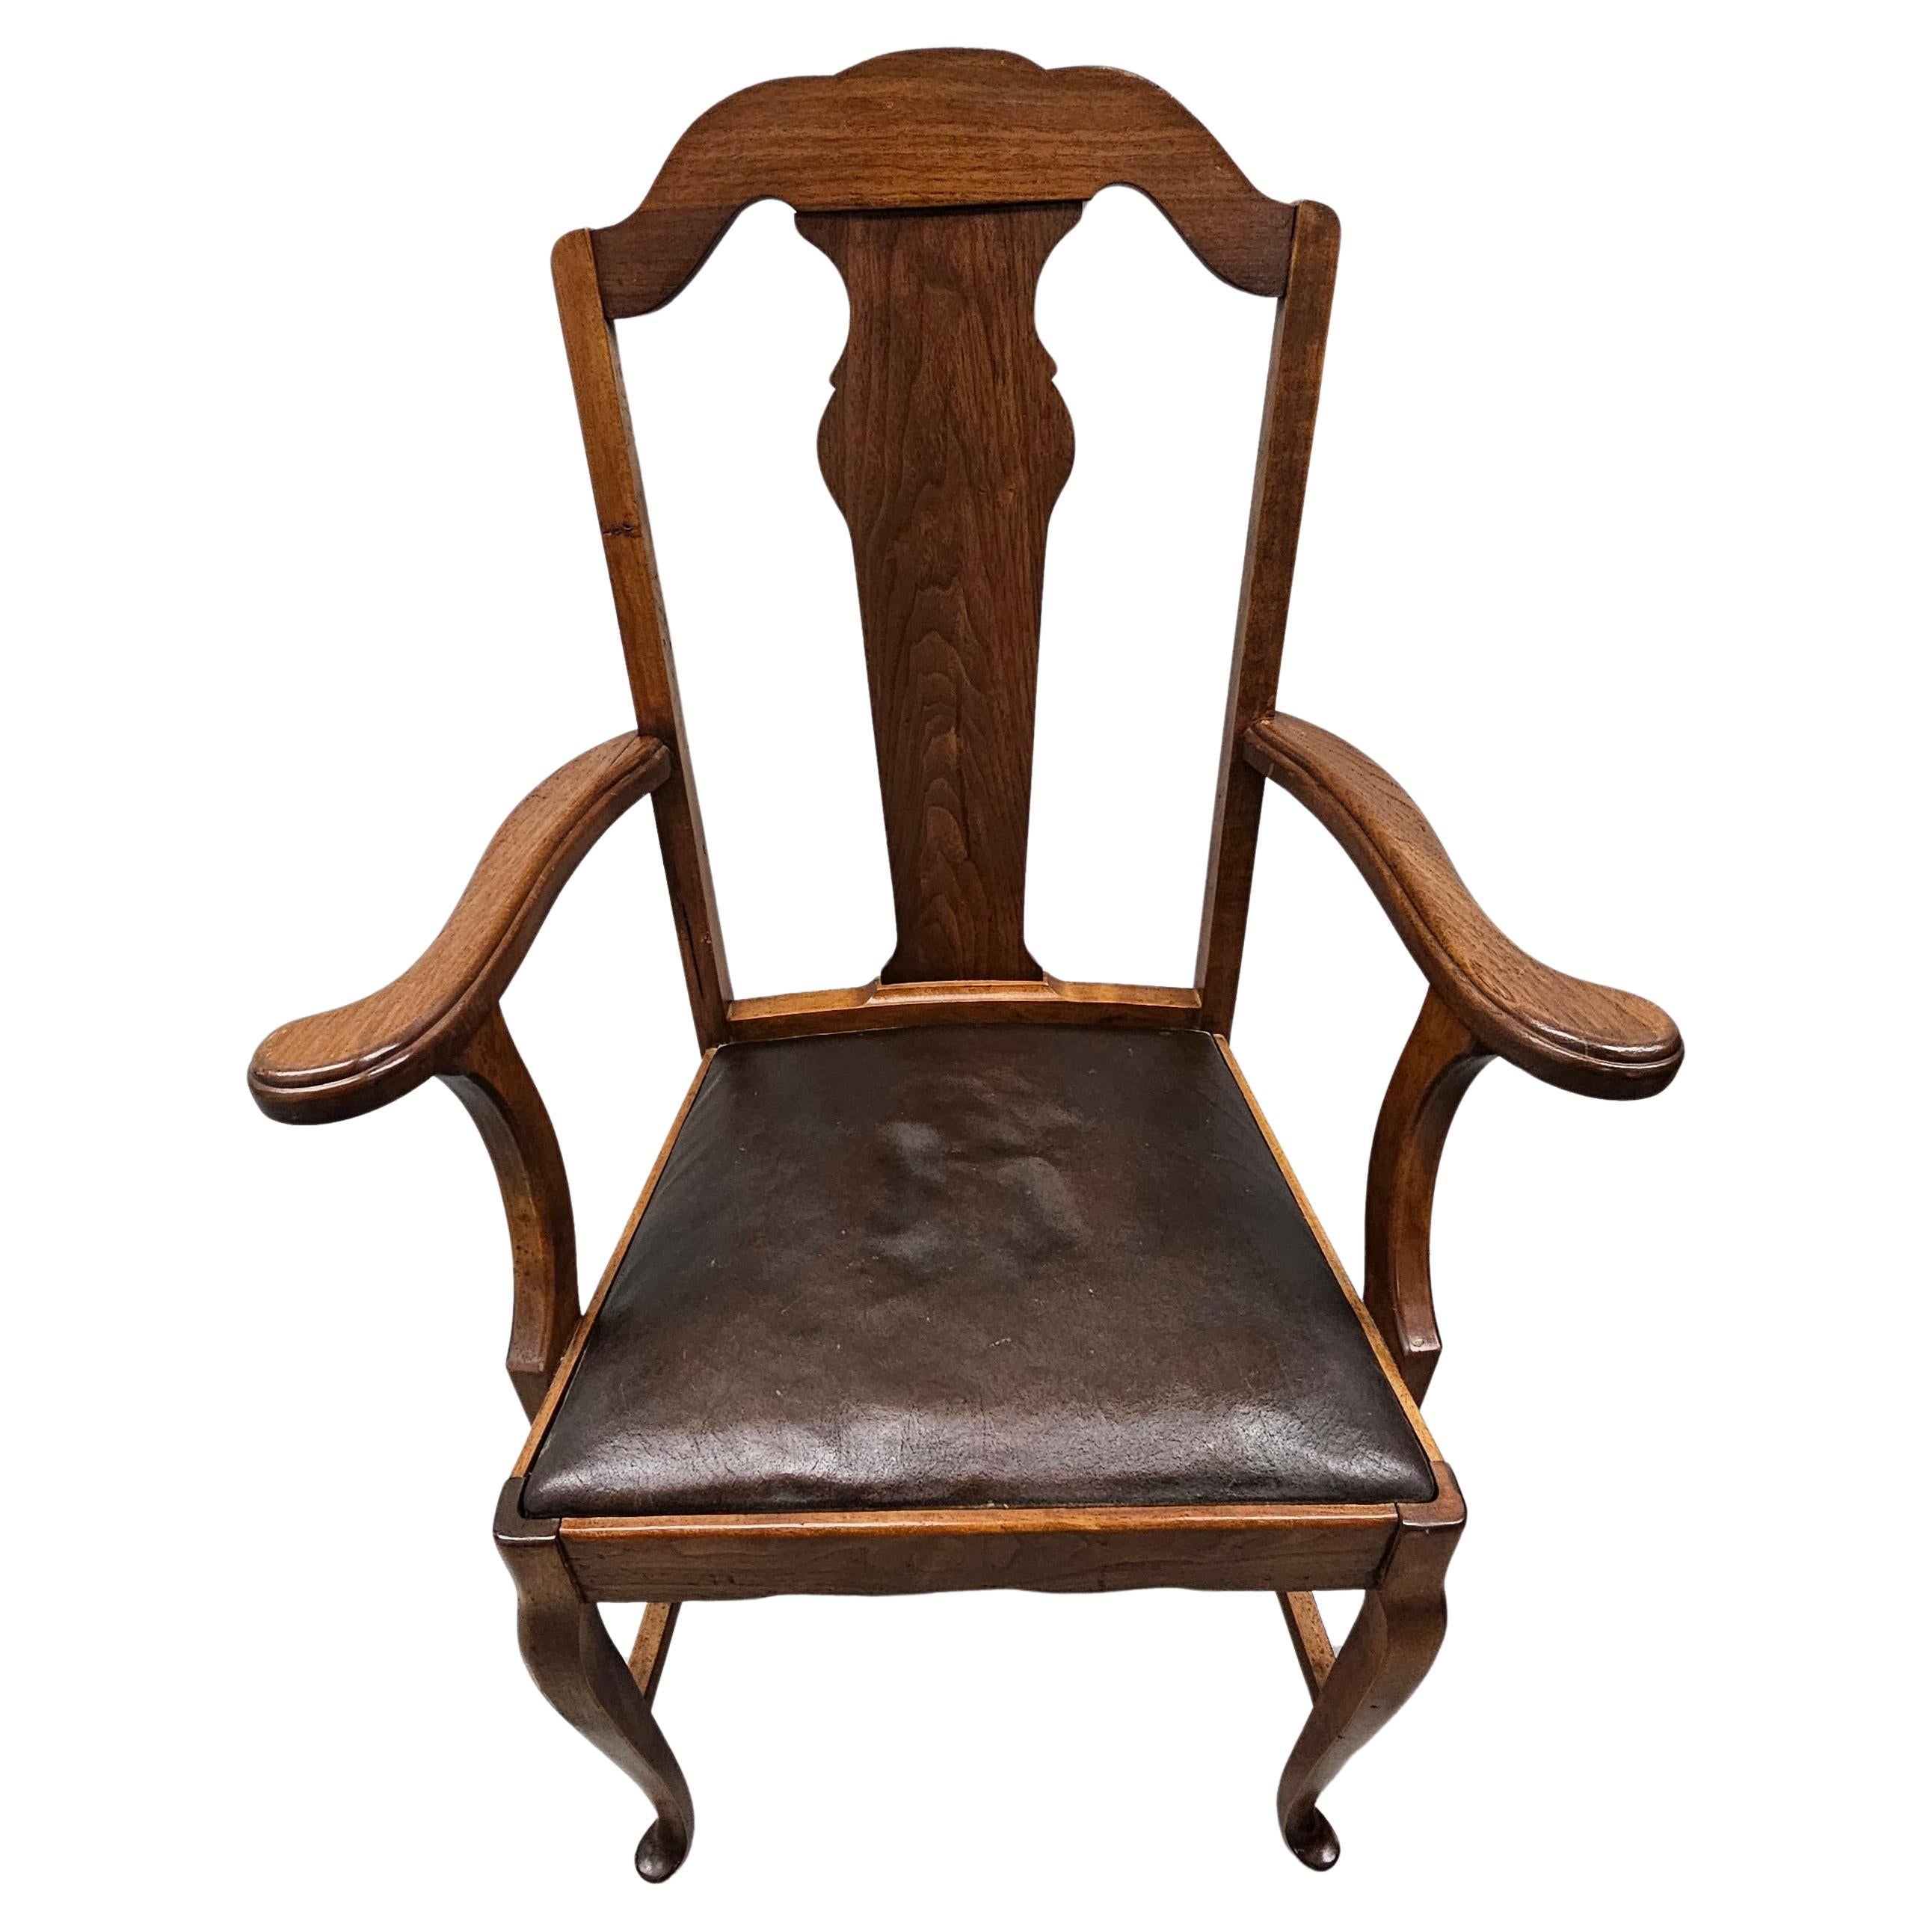 A 1916 Sikes Furniture Company Walnut and Leather Upholstered Seat Armchair. Measures 26